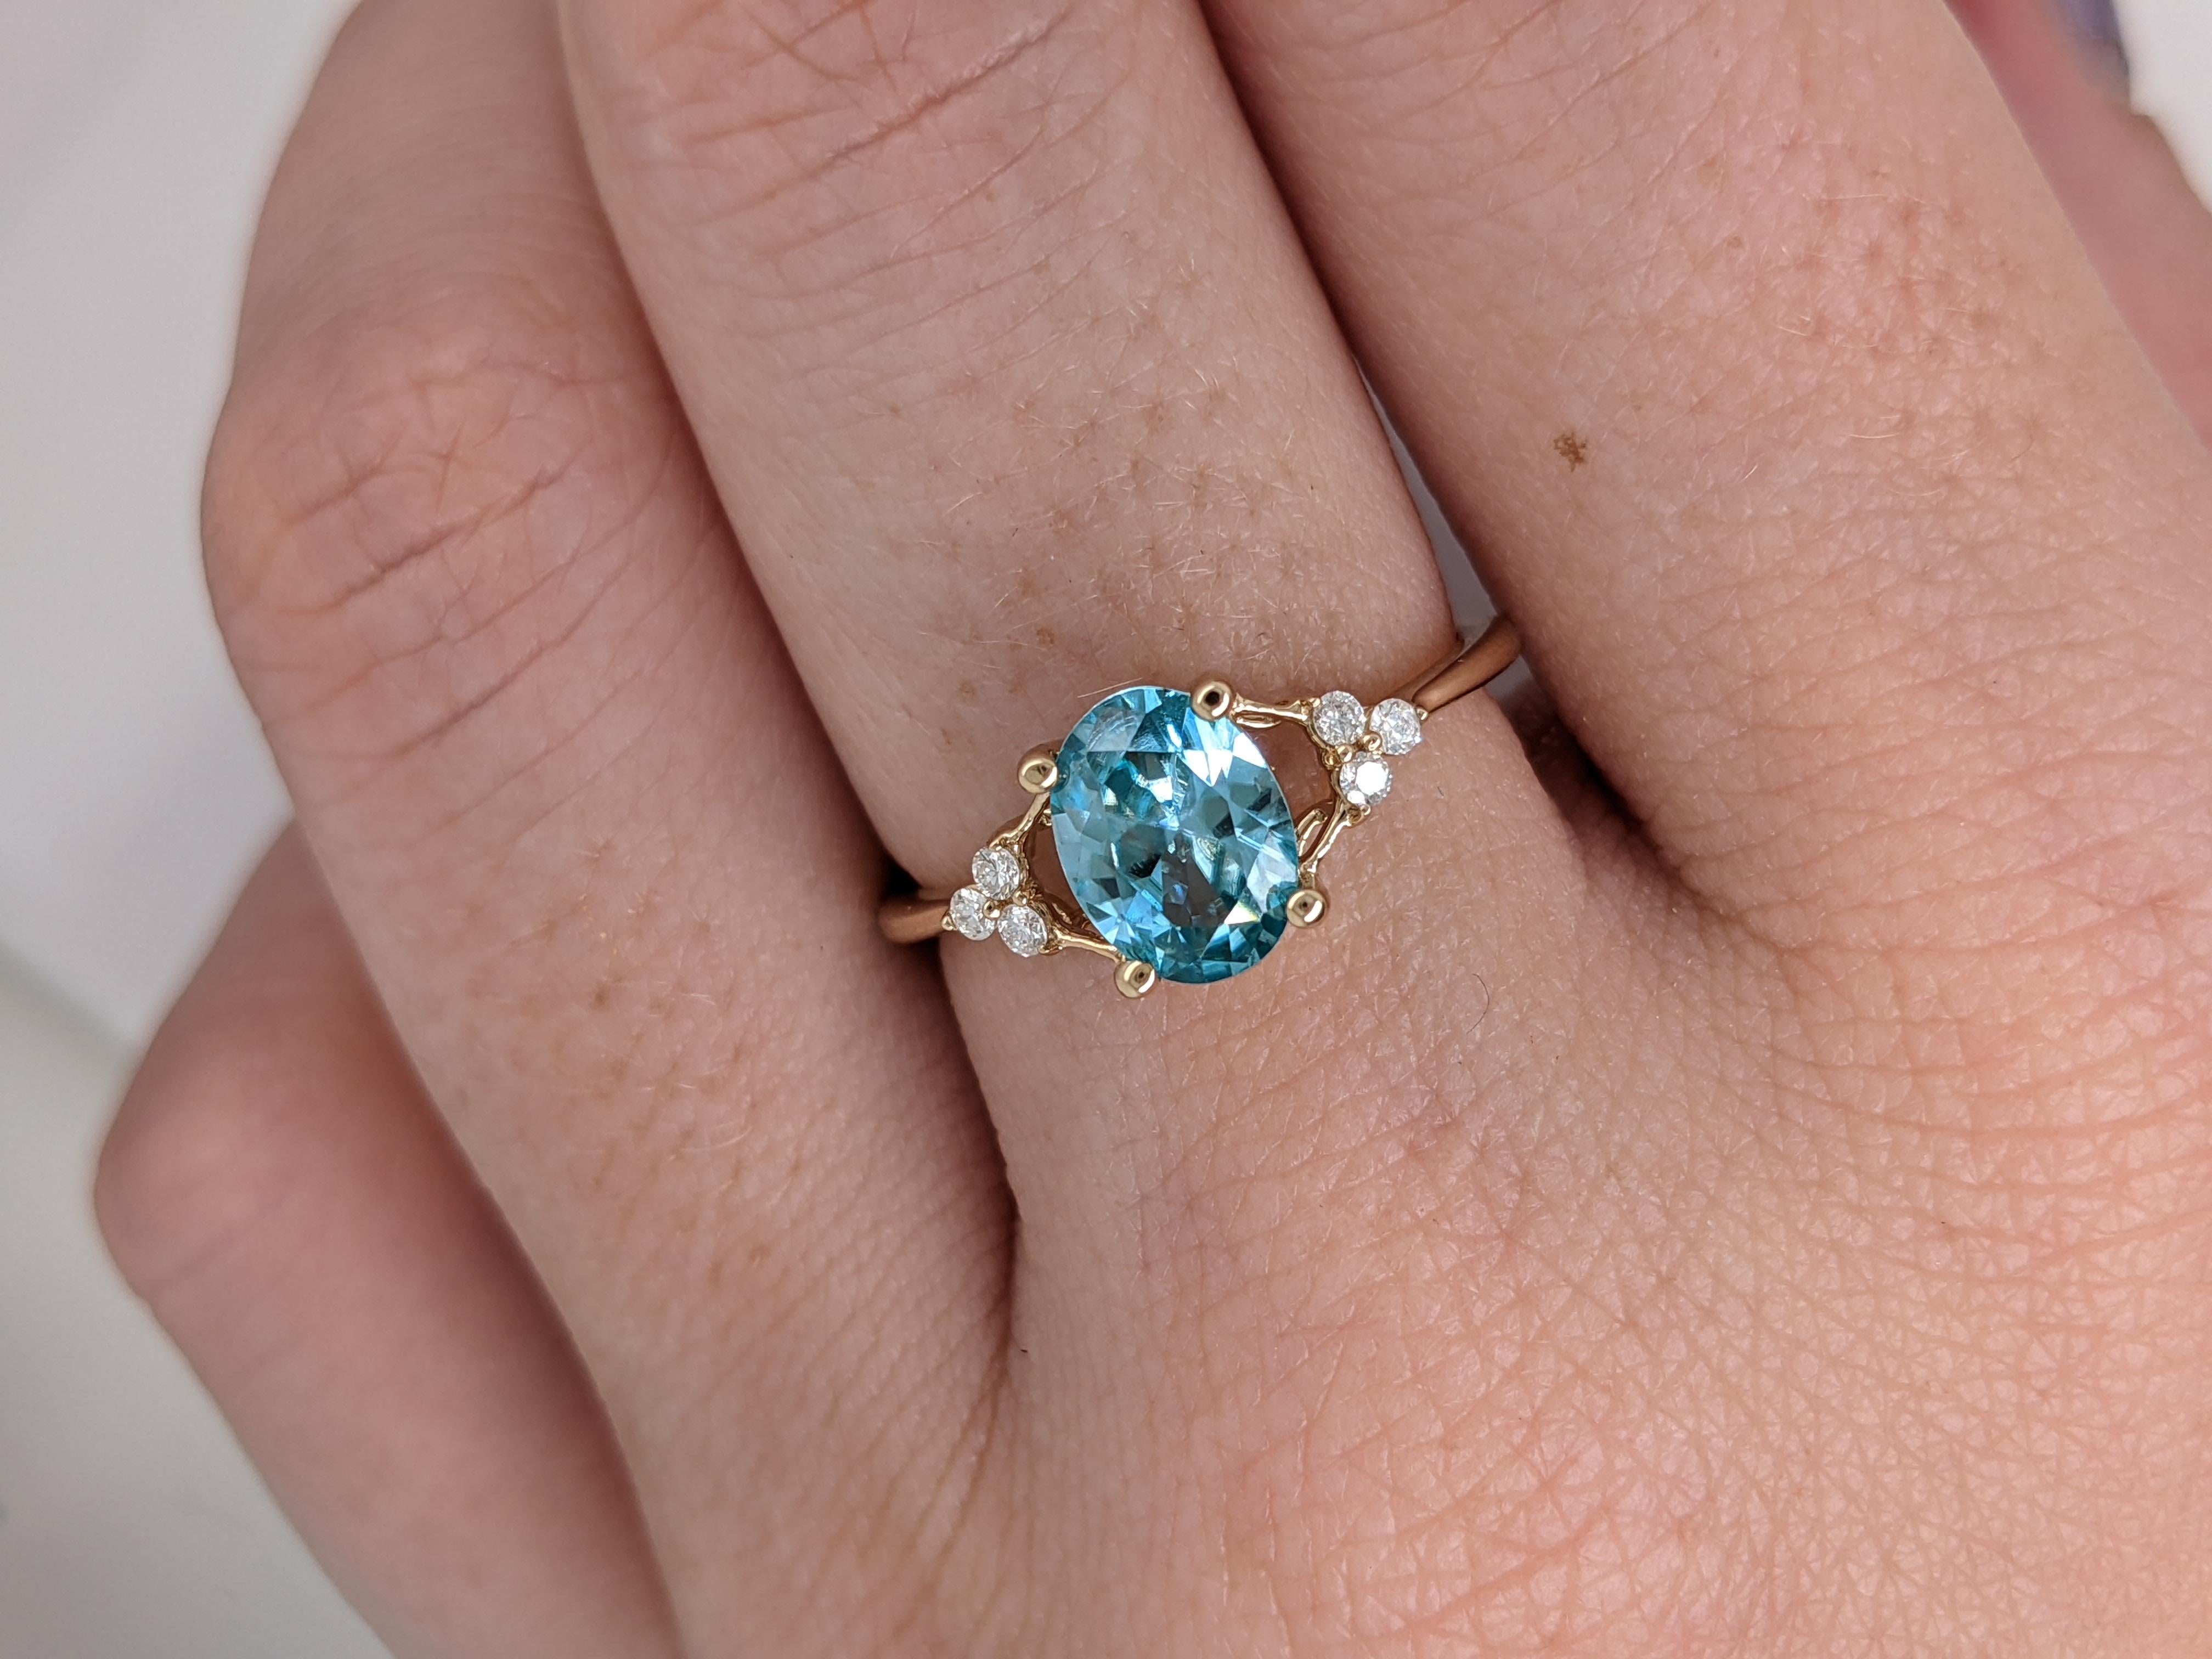 Women's 1.7ct Blue Zircon Ring w Diamond Accent Halo in 14K Yellow Gold Oval 8x6mm For Sale